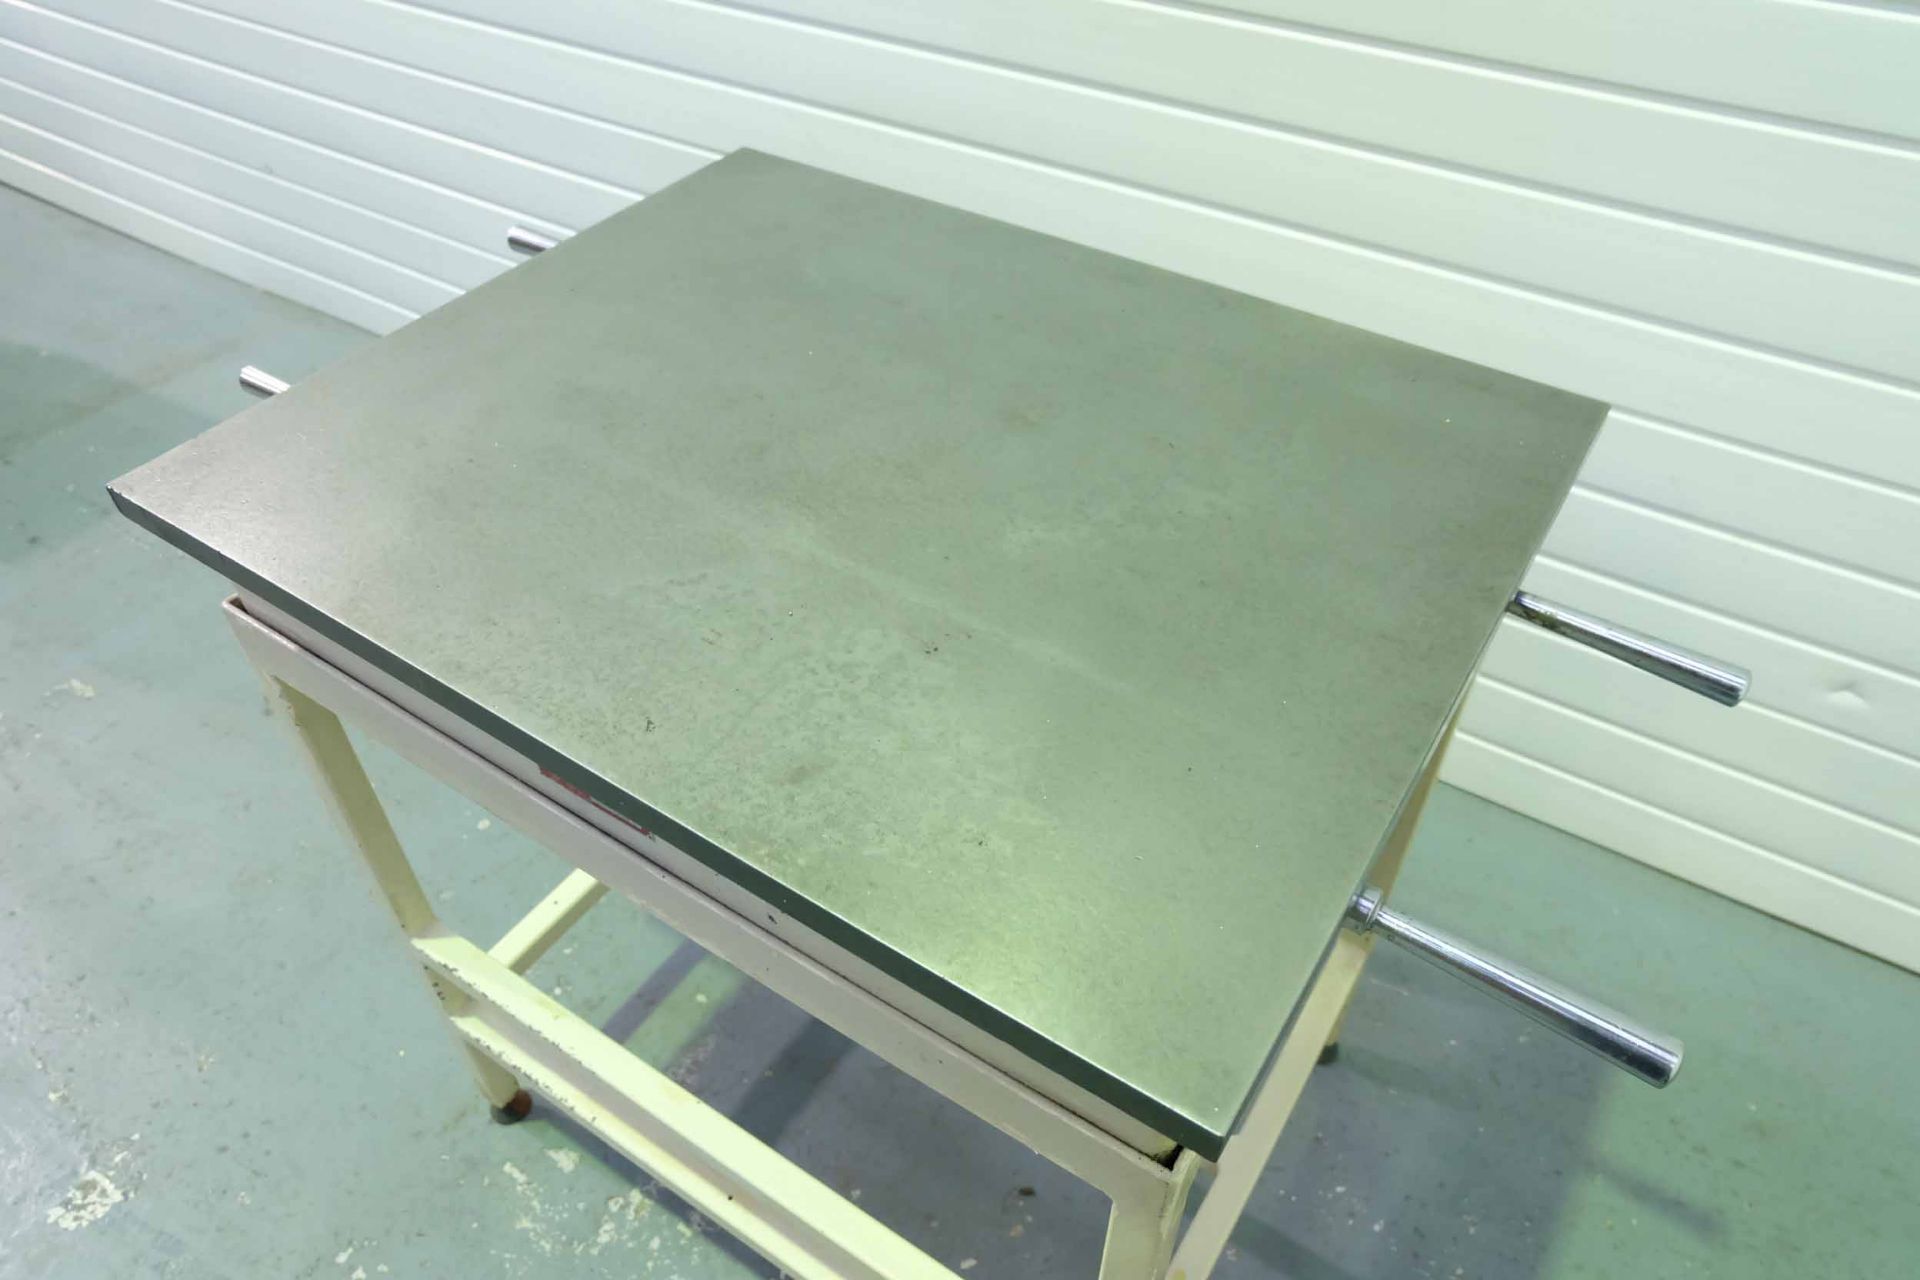 Surface Flatness Cast Iron Surface Plate on Steel Stand. Size 30" x 24". Grade 2. - Image 4 of 7